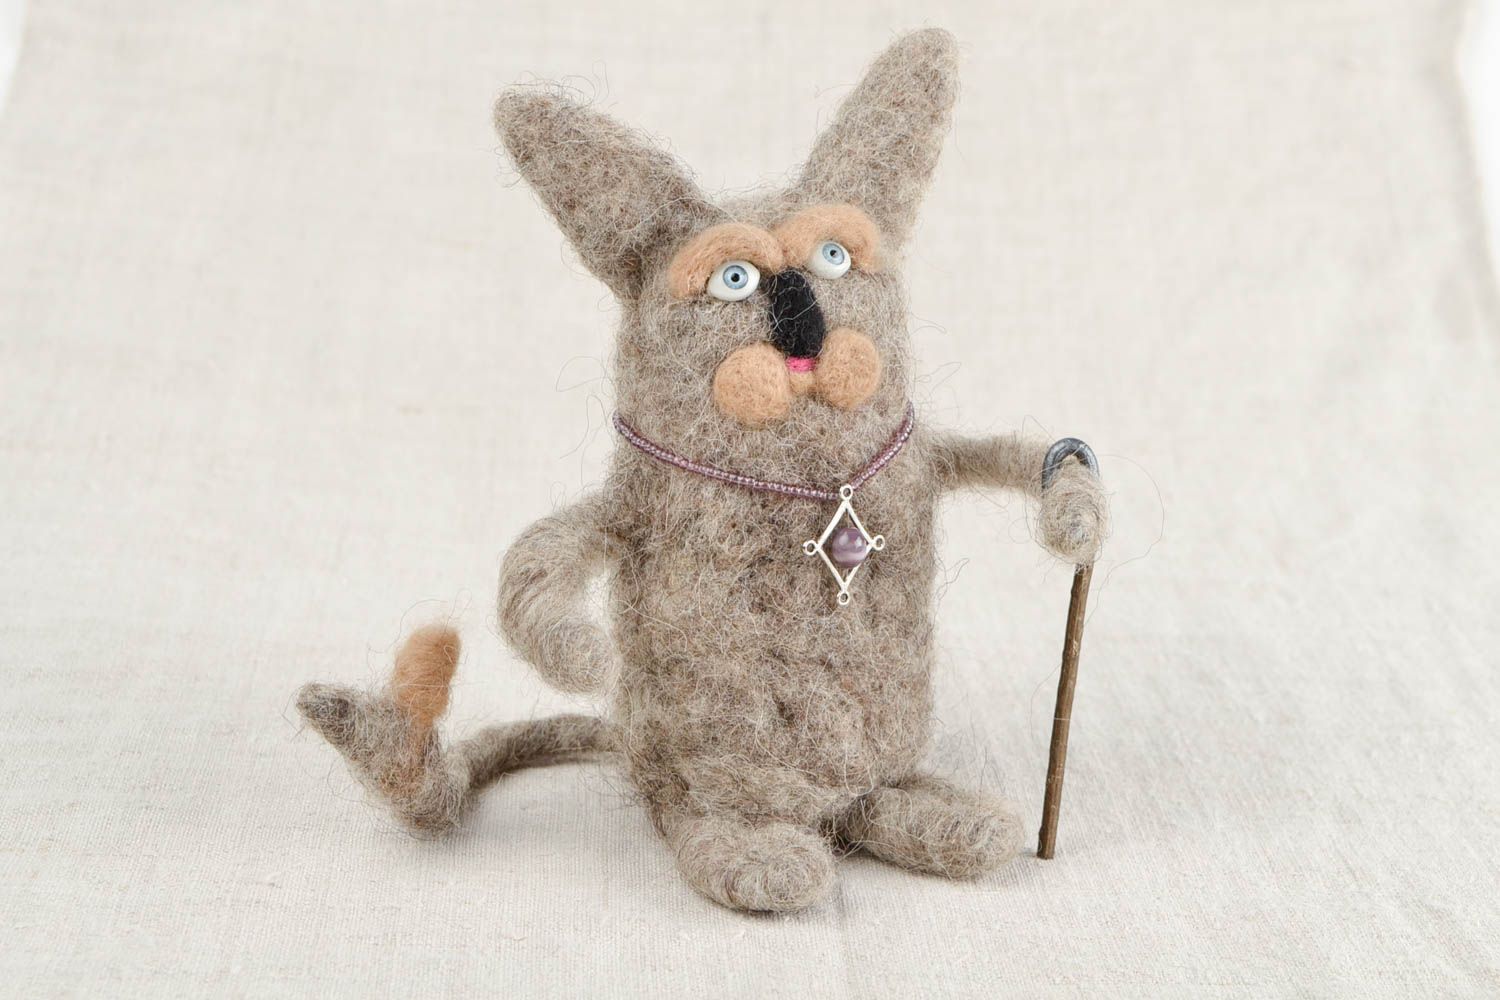 Homemade soft toy stuffed animals toy wolf unique toys animal figurines photo 1